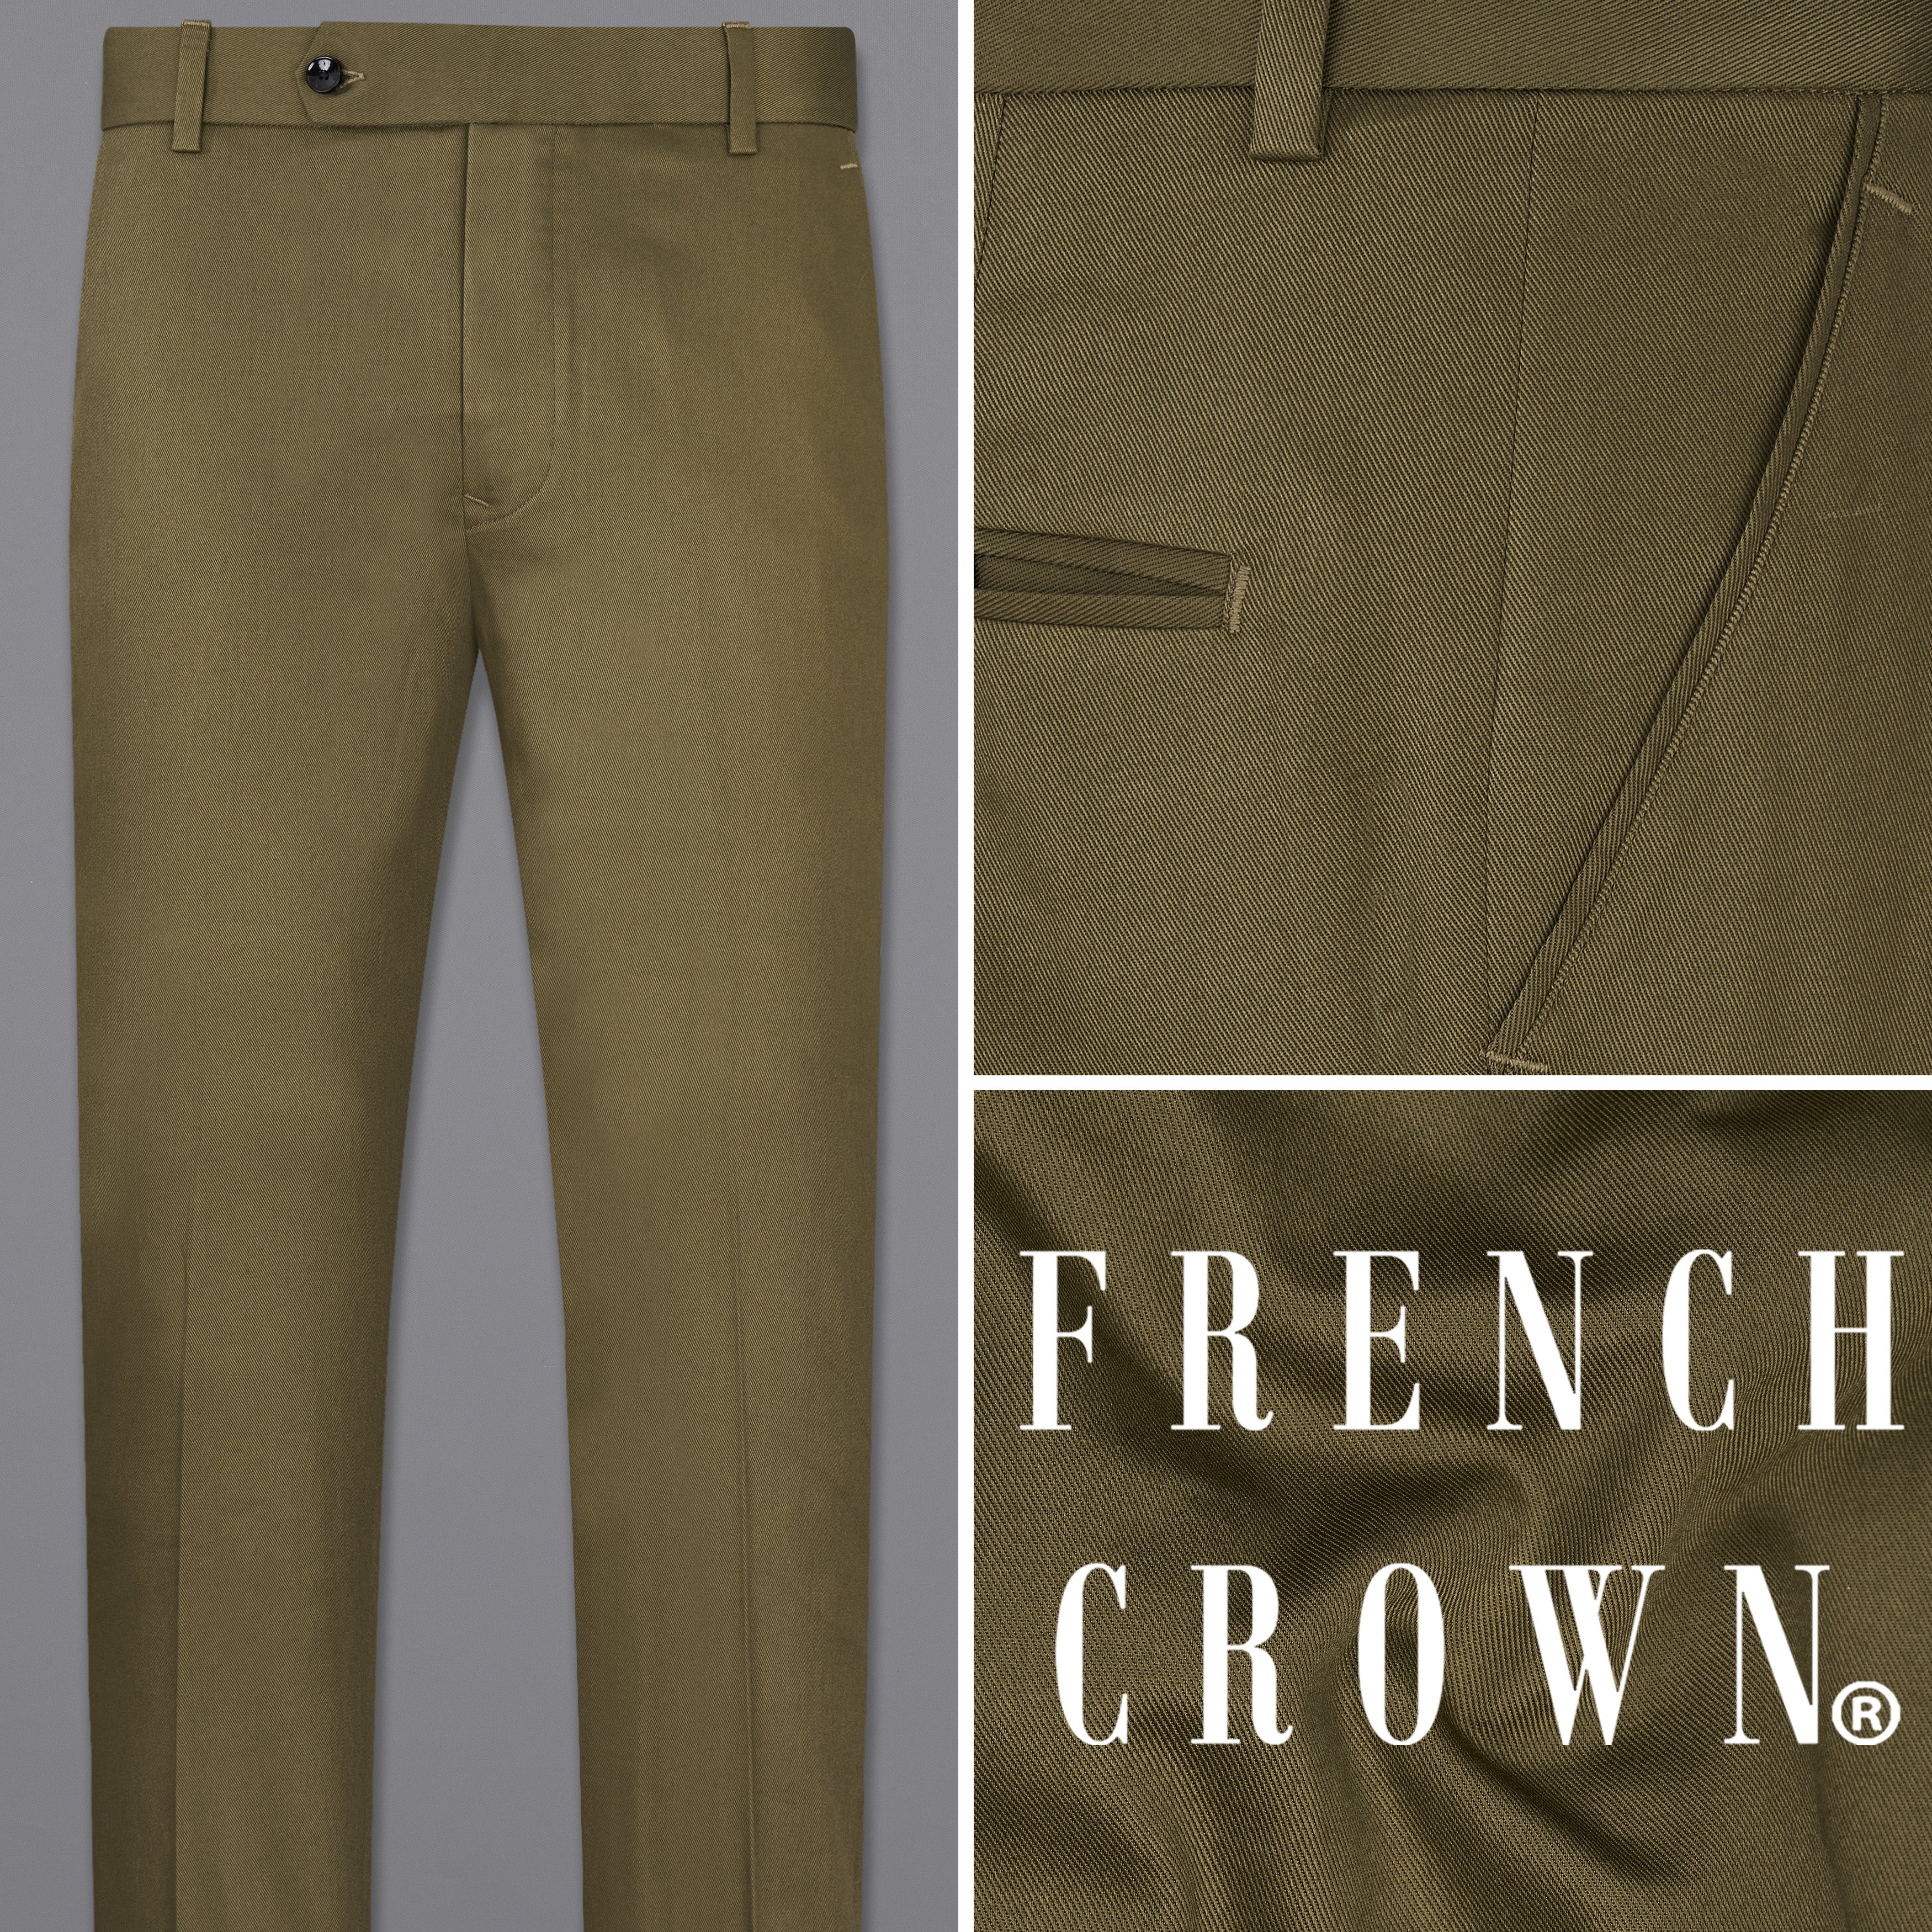 French Crown Review | #TallMenStyle #frenchcrown - YouTube